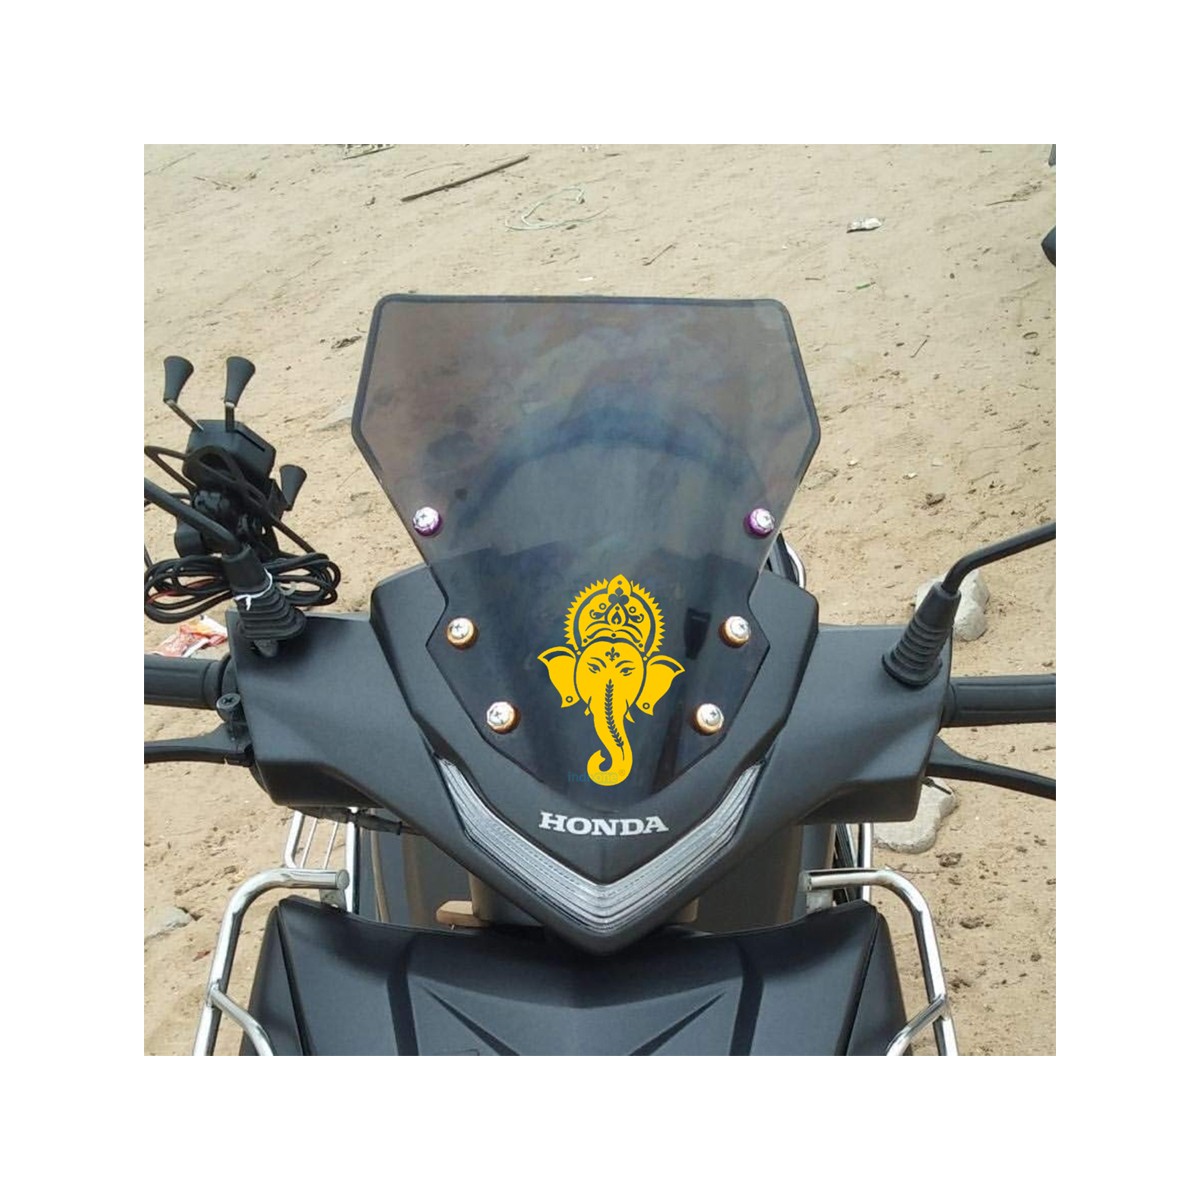 indnone® Ganesha Lord Logo Sticker for Bike Water Proof PVC Vinyl Decal Sticker | Yellow Color Standard Size